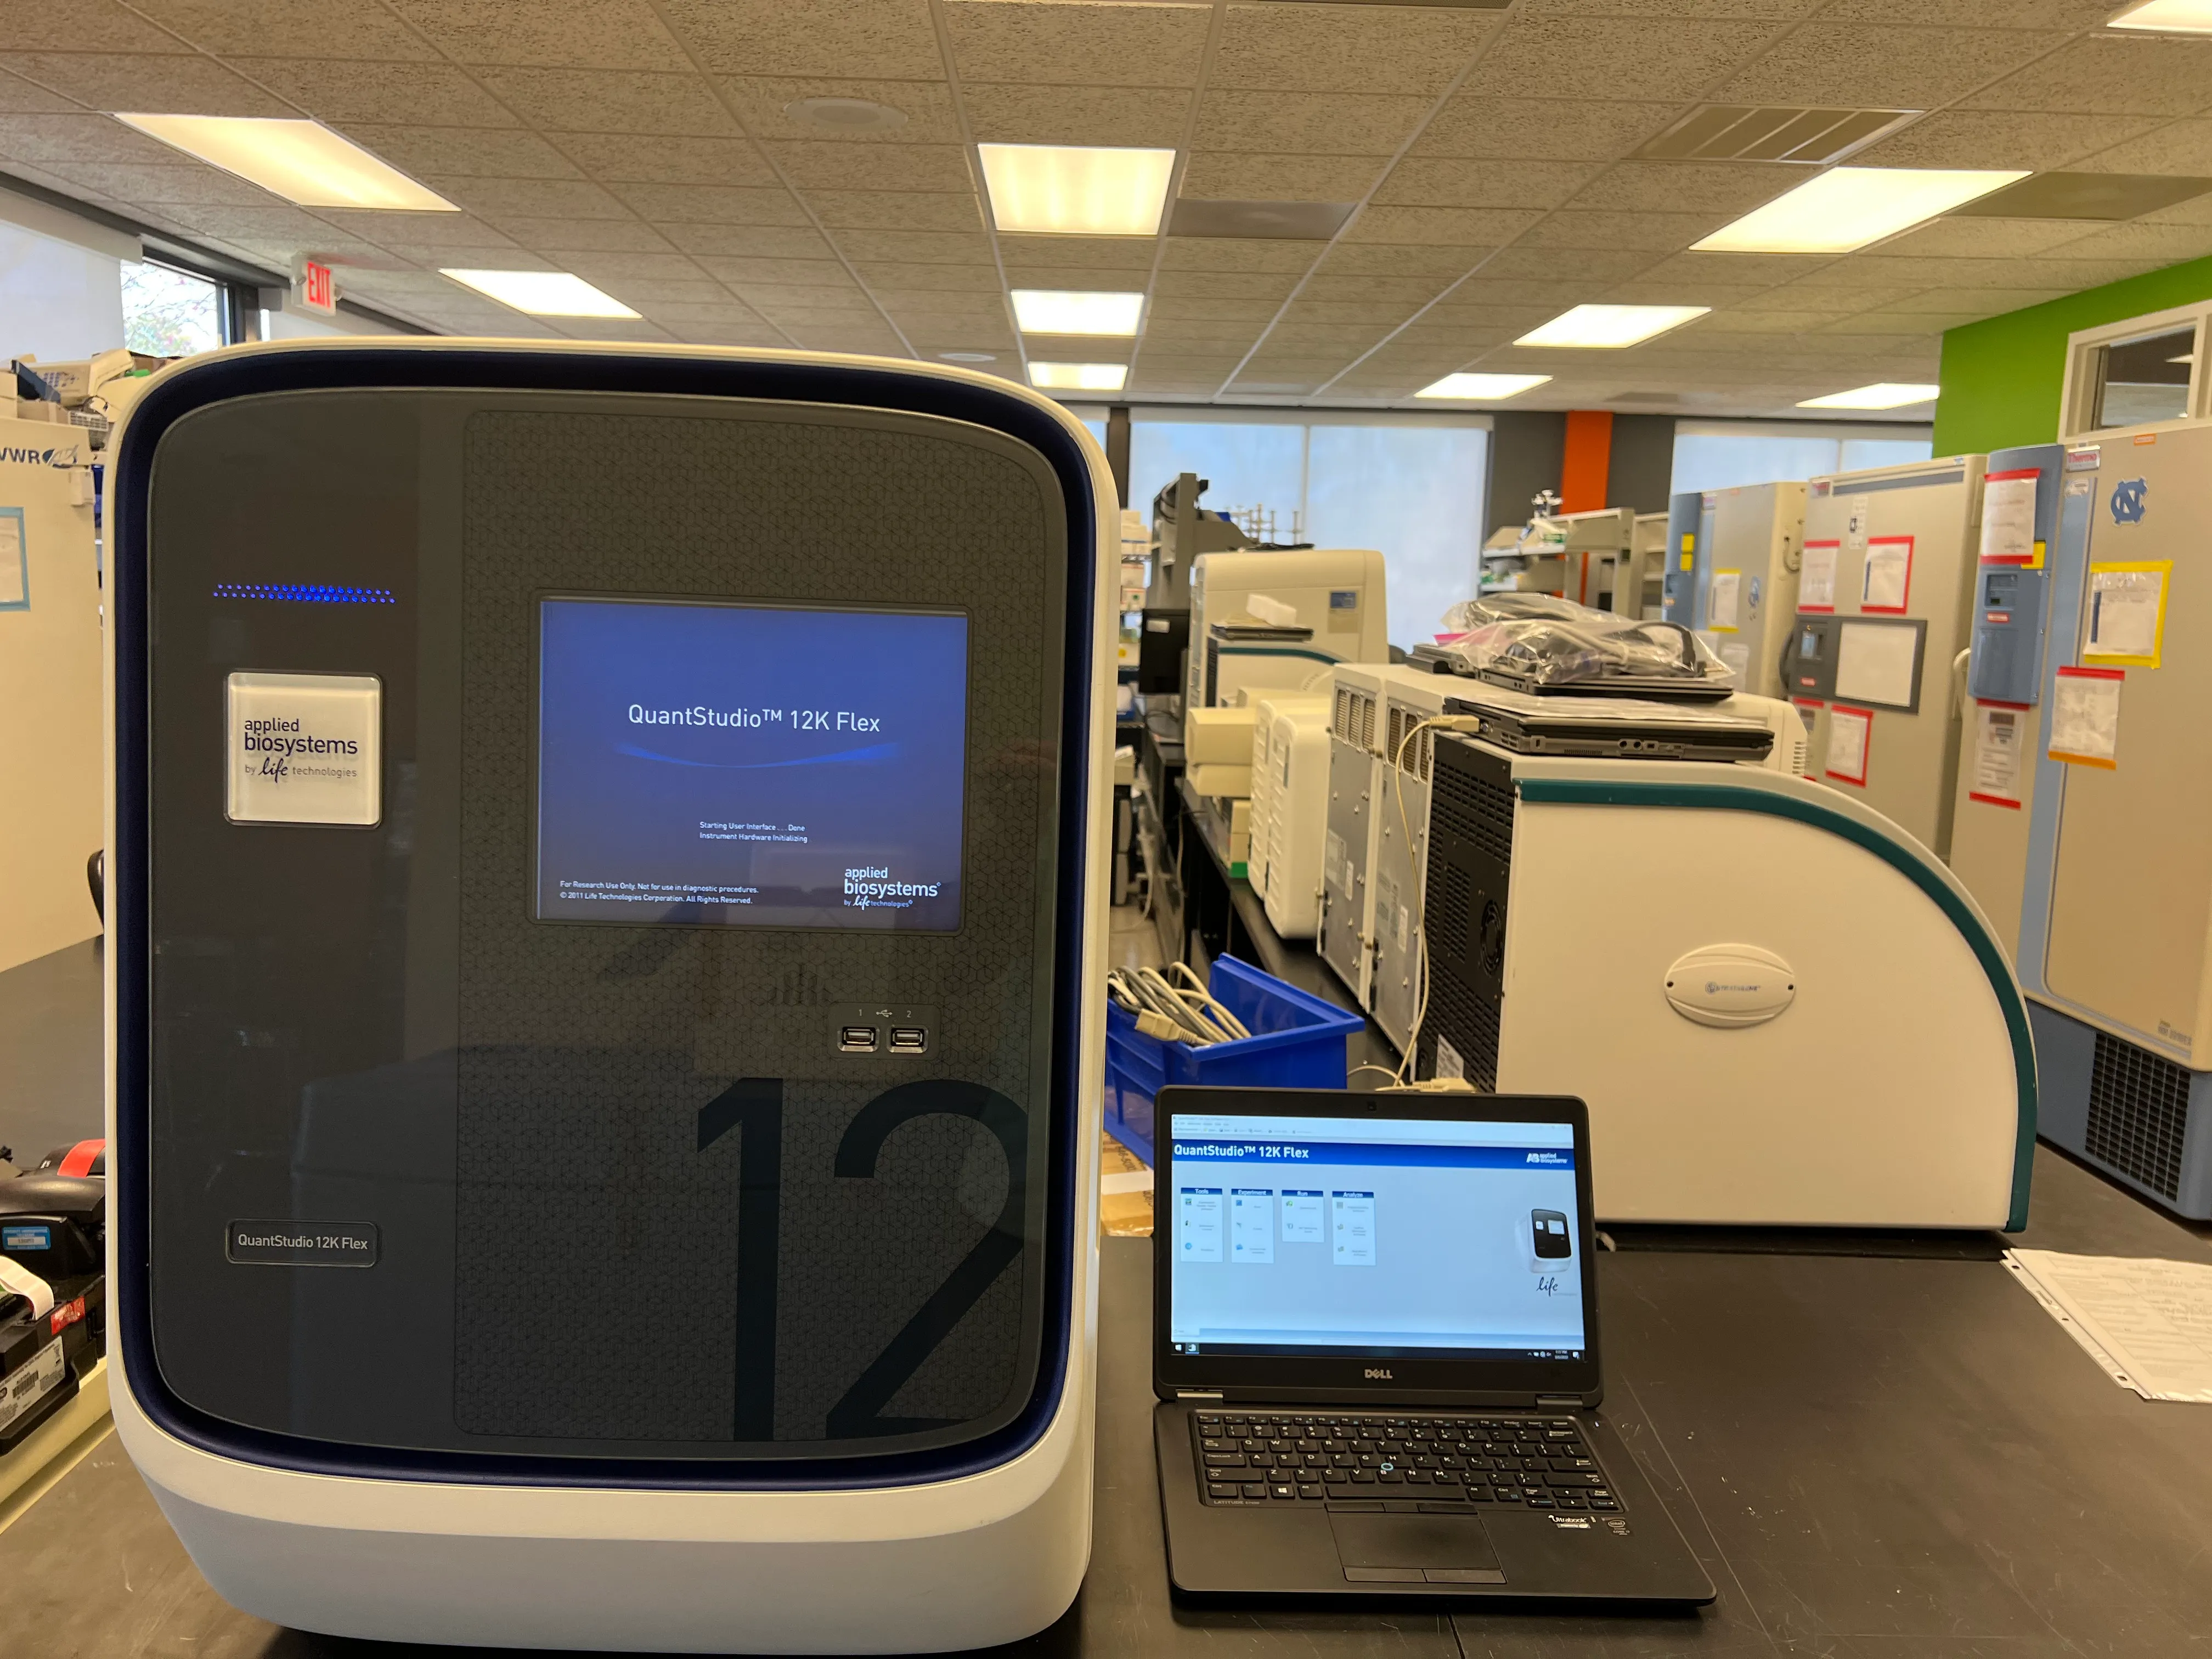 QuantStudio 12-Flex Real-Time PCR System with 96, 384 and Open Array Block sets-Year 2019